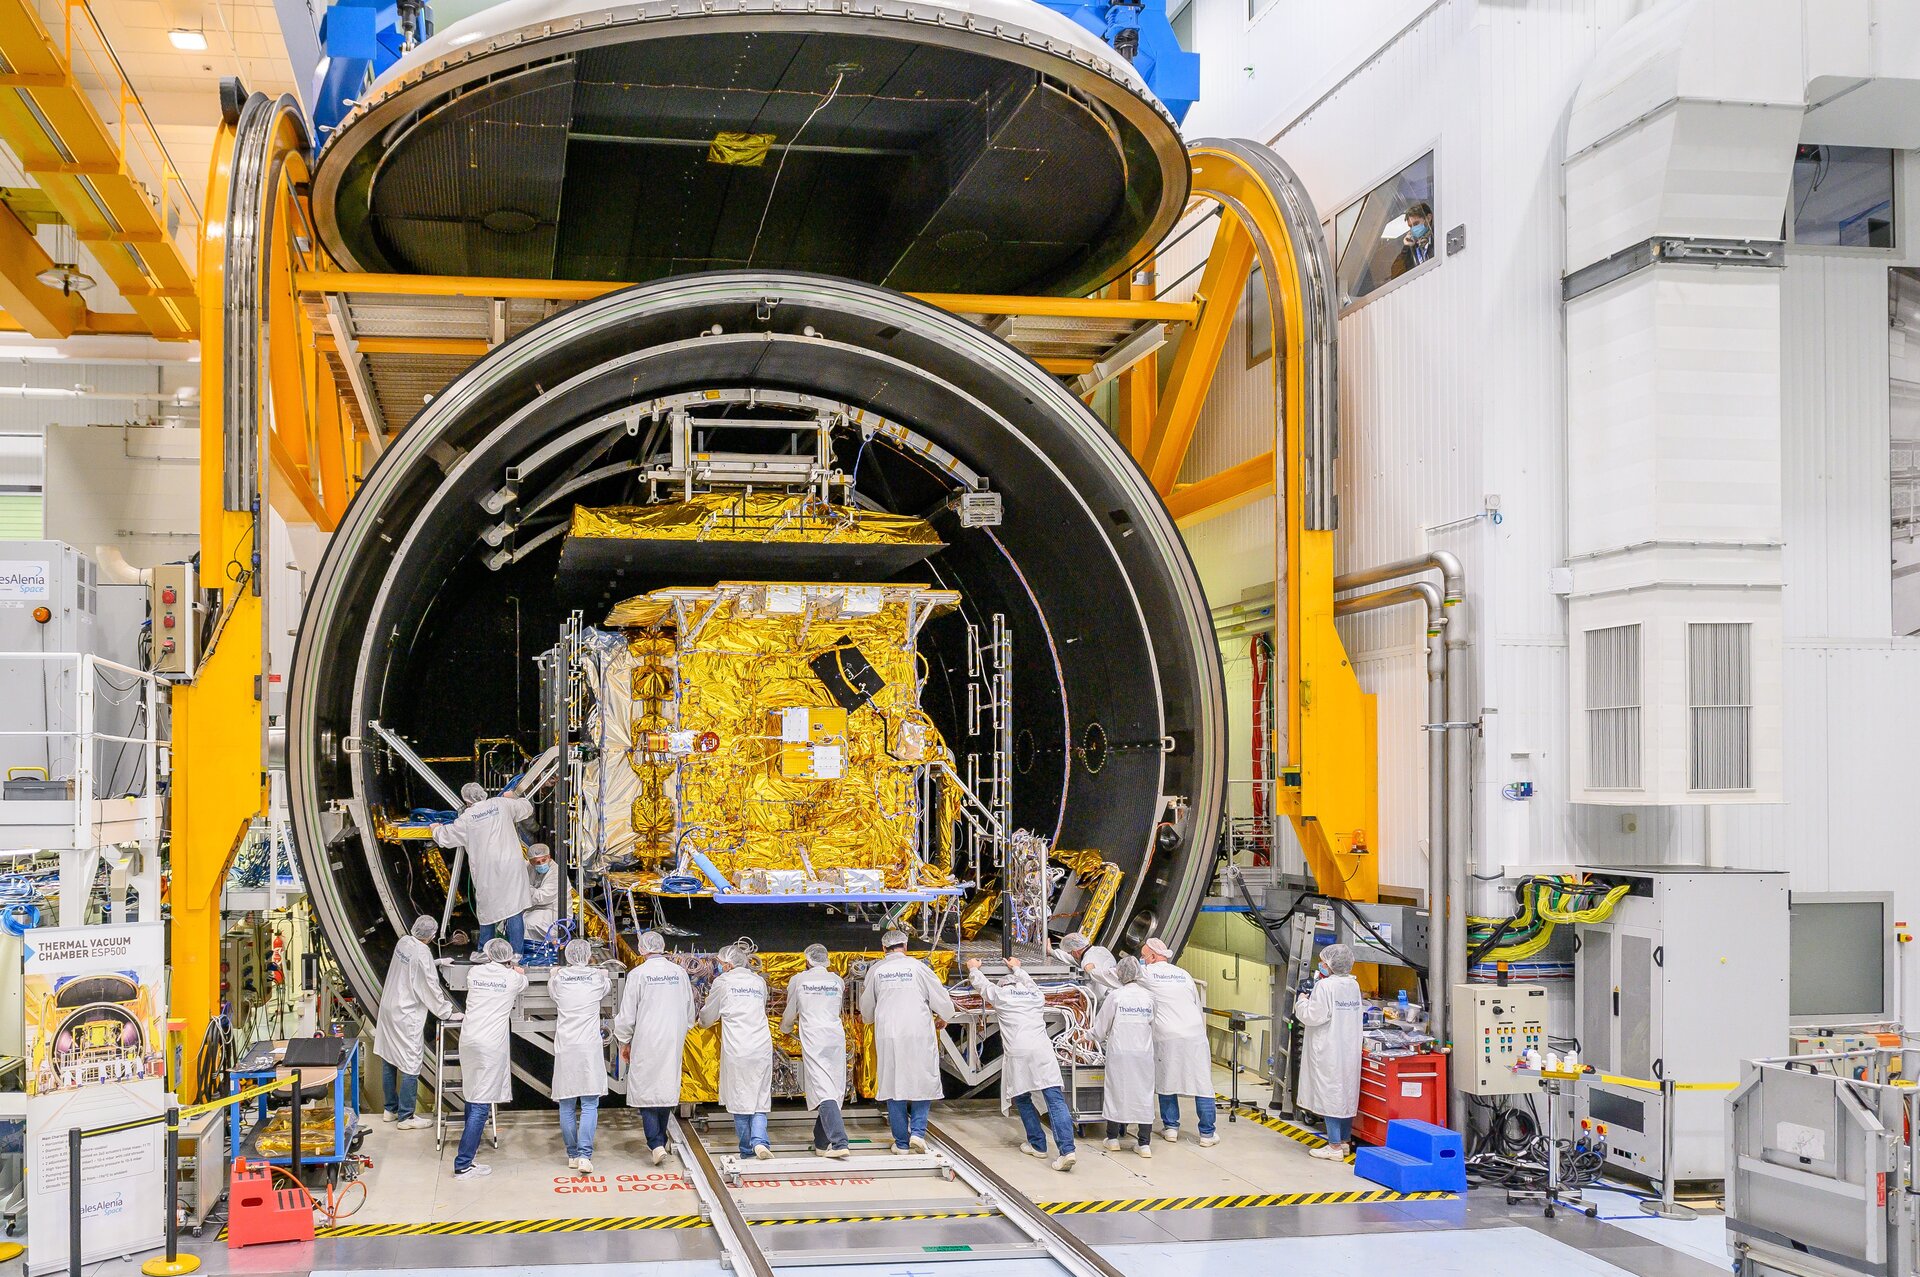 SES-17 in a thermal vacuum chamber